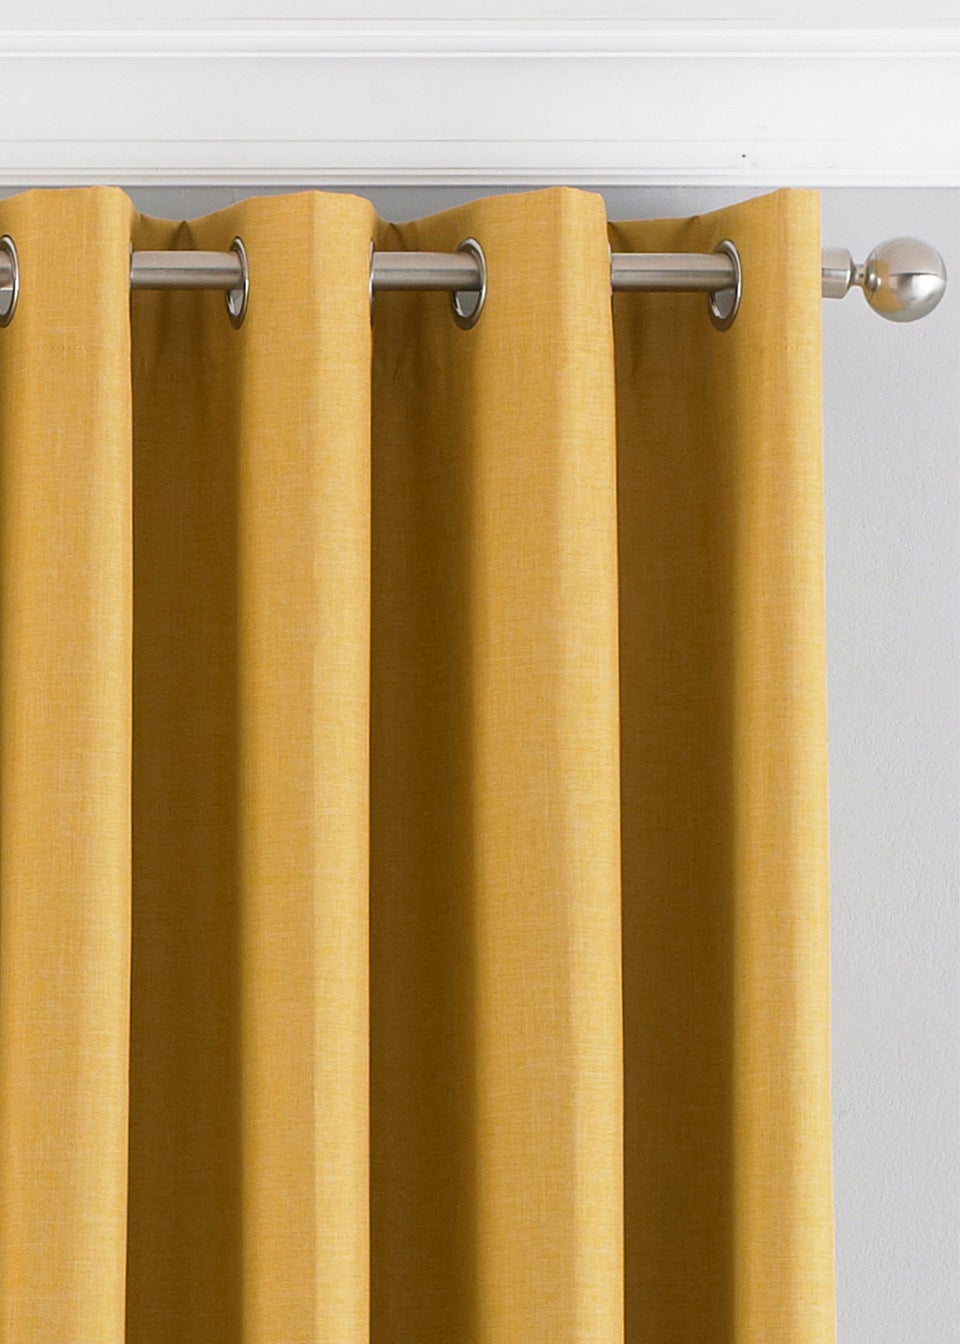 Riva Home Twilight Thermal Blackout Ringtop Eyelet Curtains